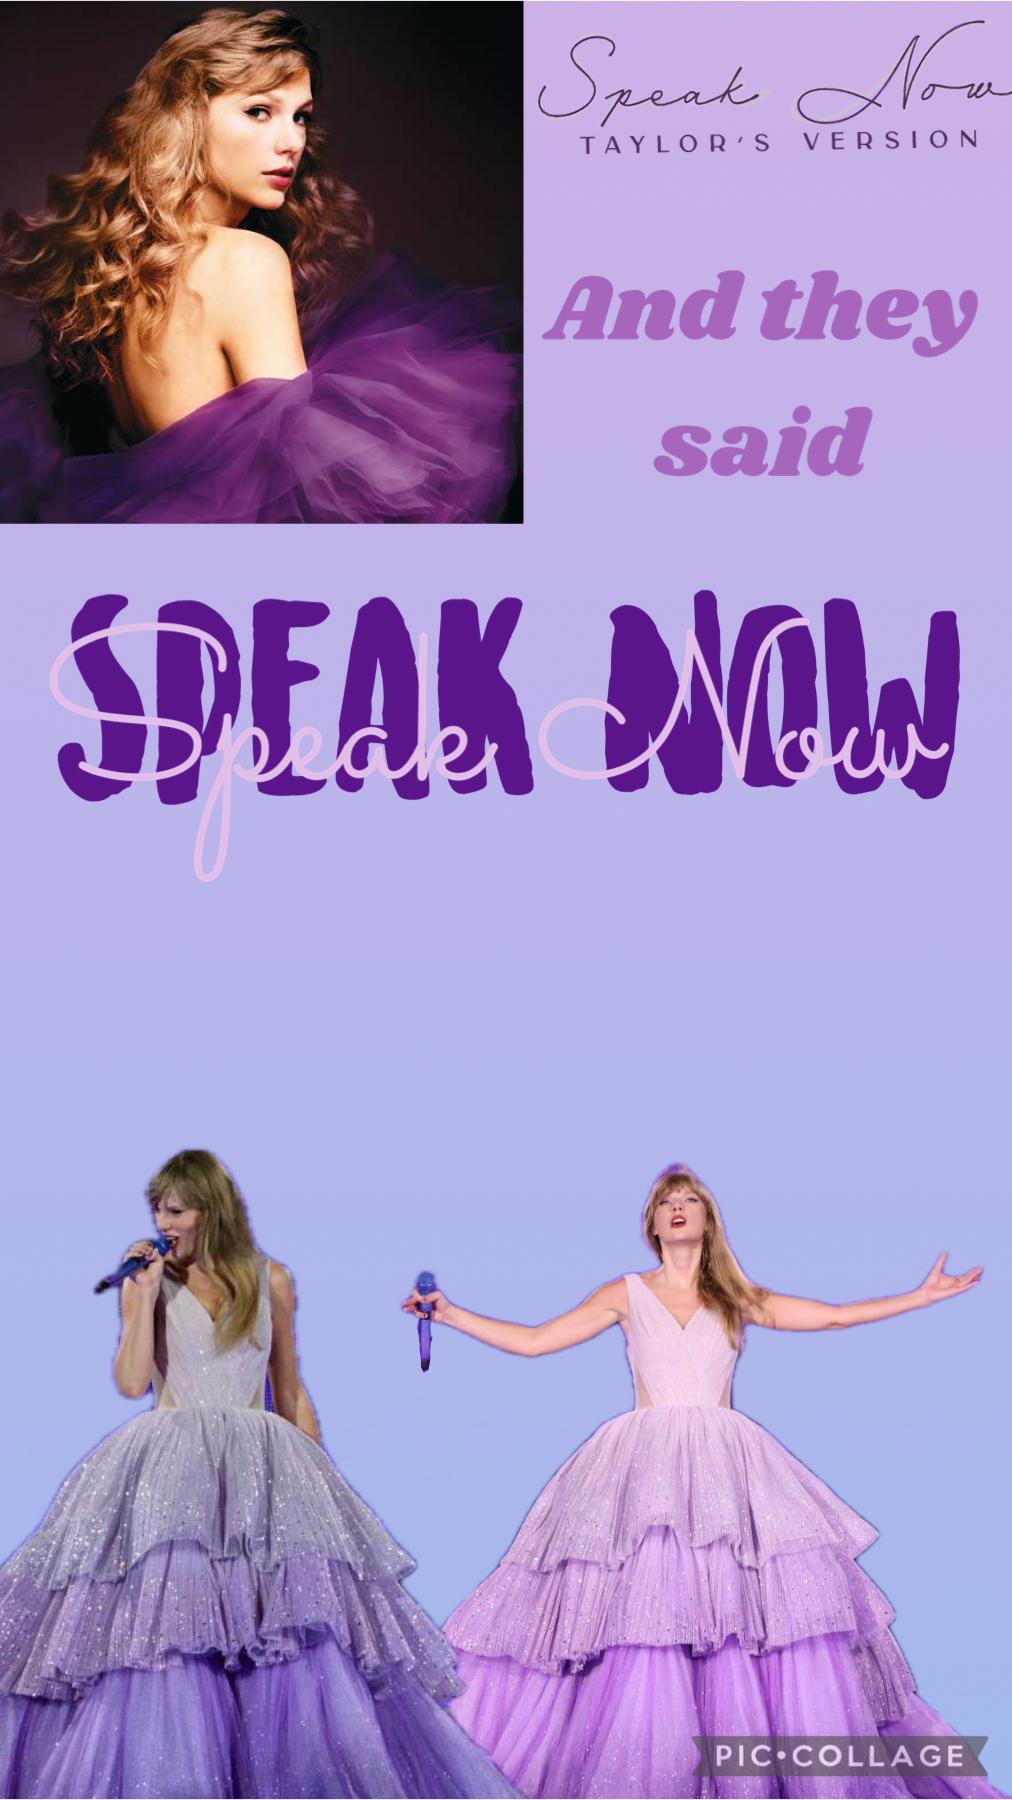 Speak now theme! I love how this turned out!